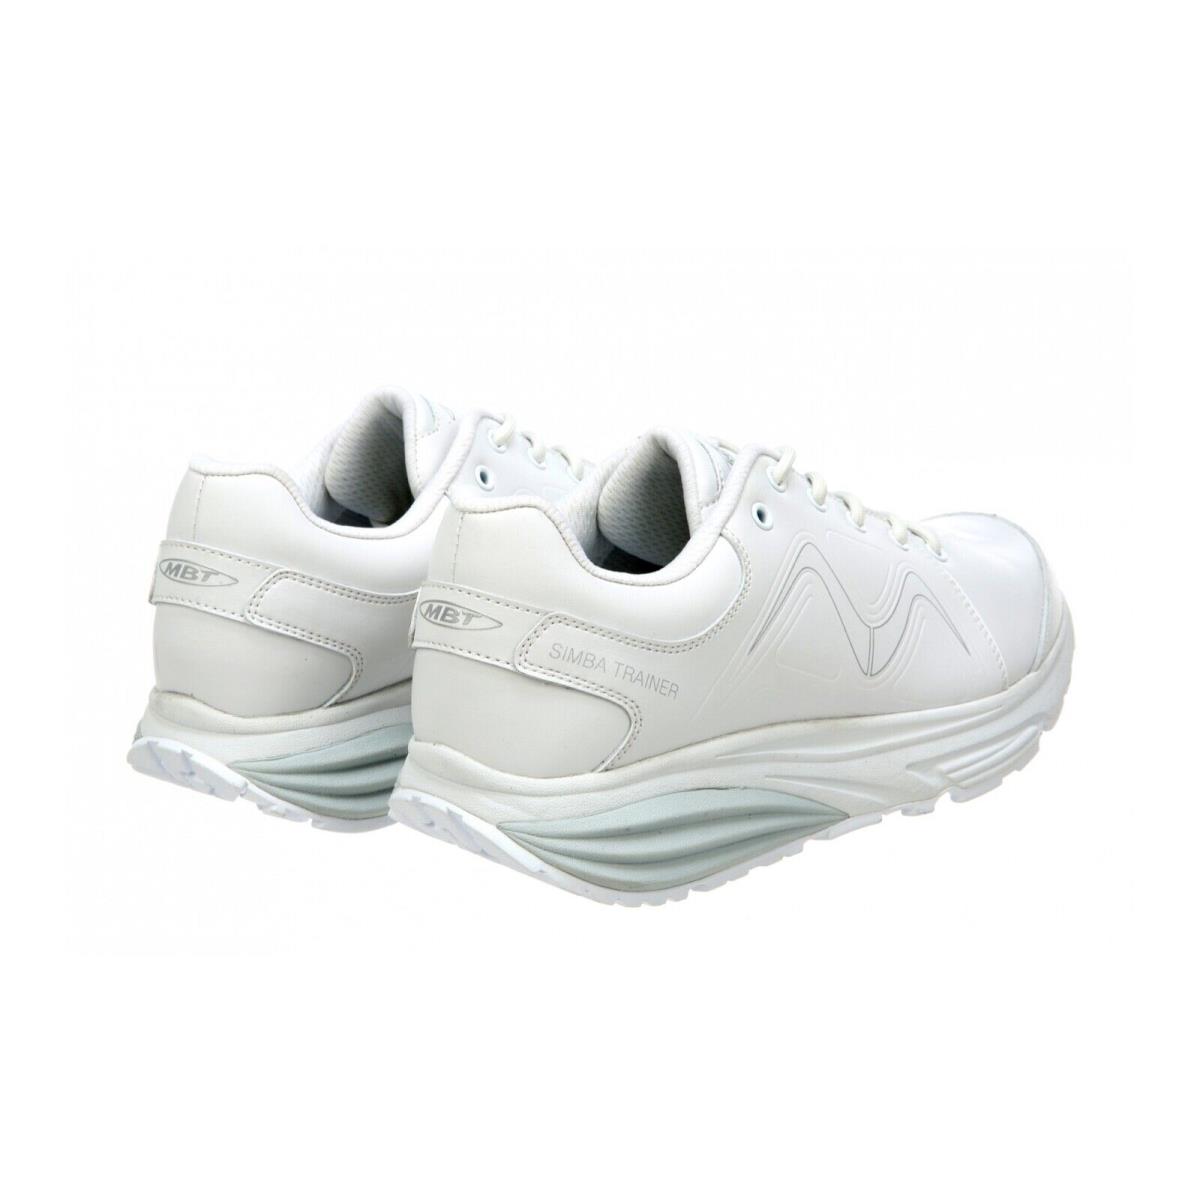 MBT shoes SIMBA TRAINER - White 1